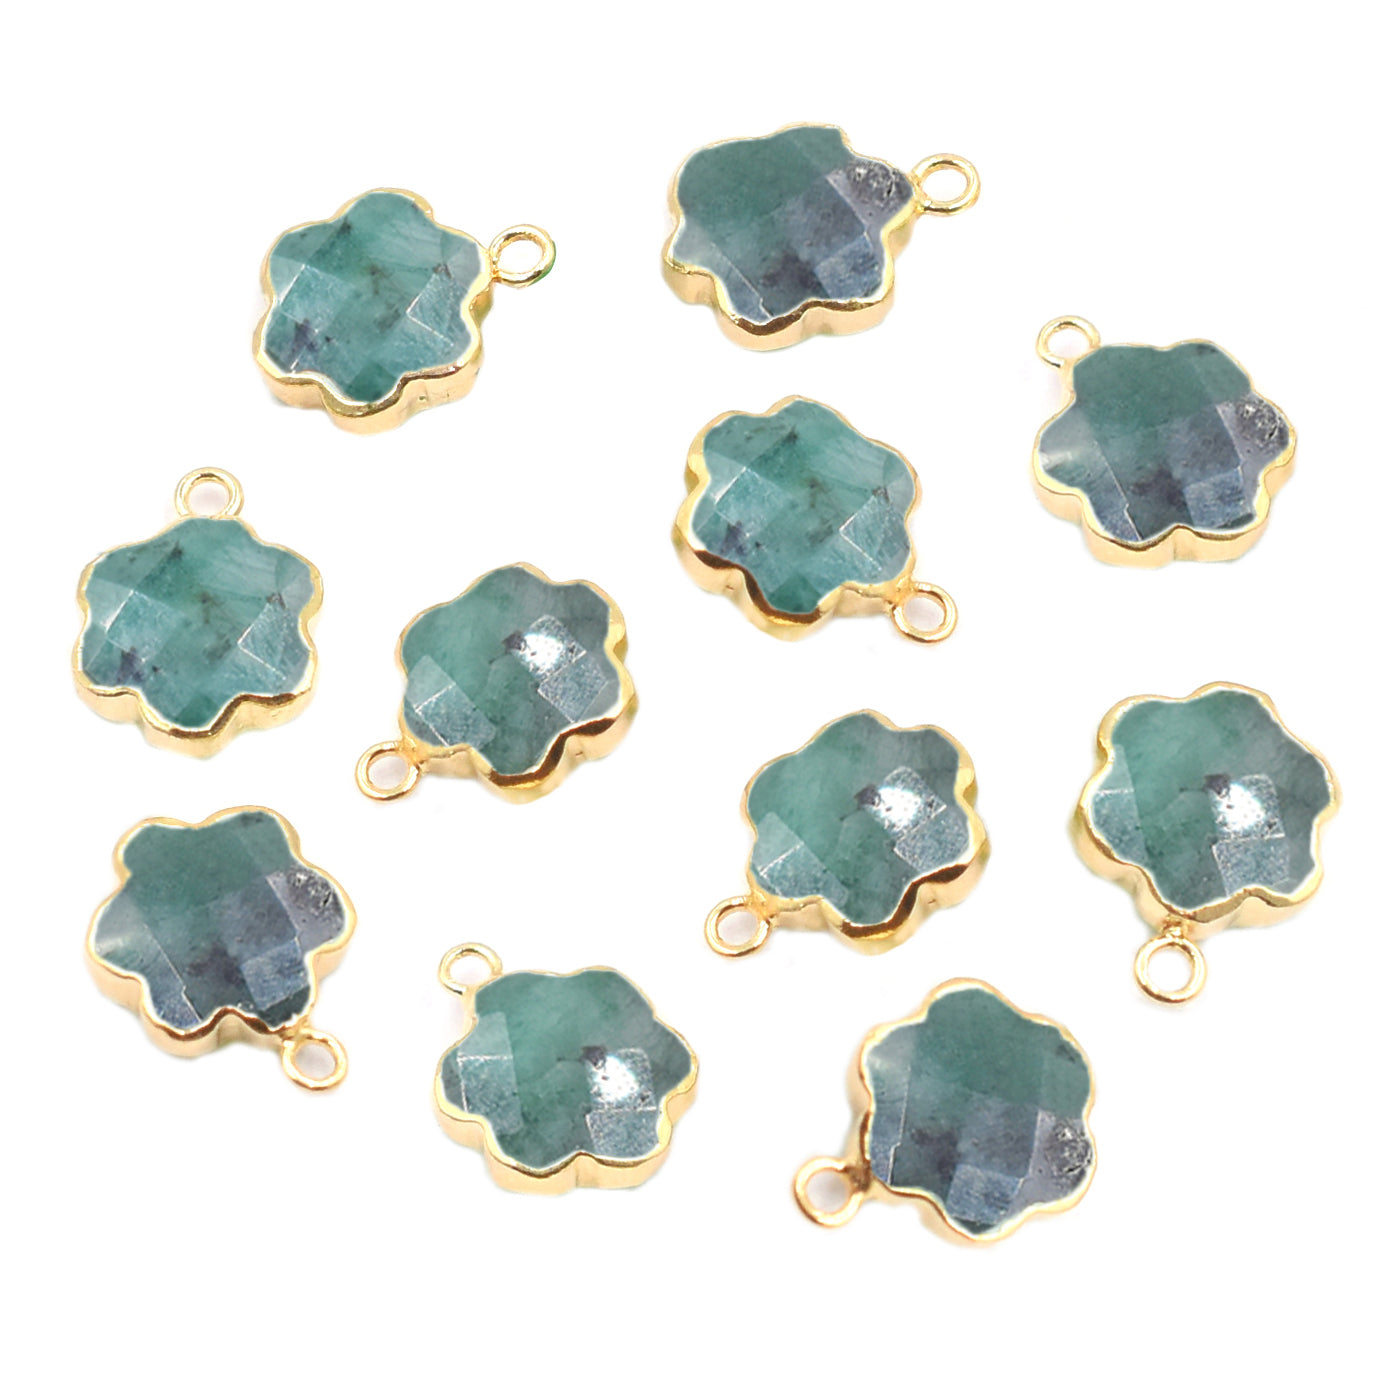 Raw Emerald 10 To 11 MM Clover Leaf Shape Gold Electroplated Pendant (Set Of 2 Pcs)